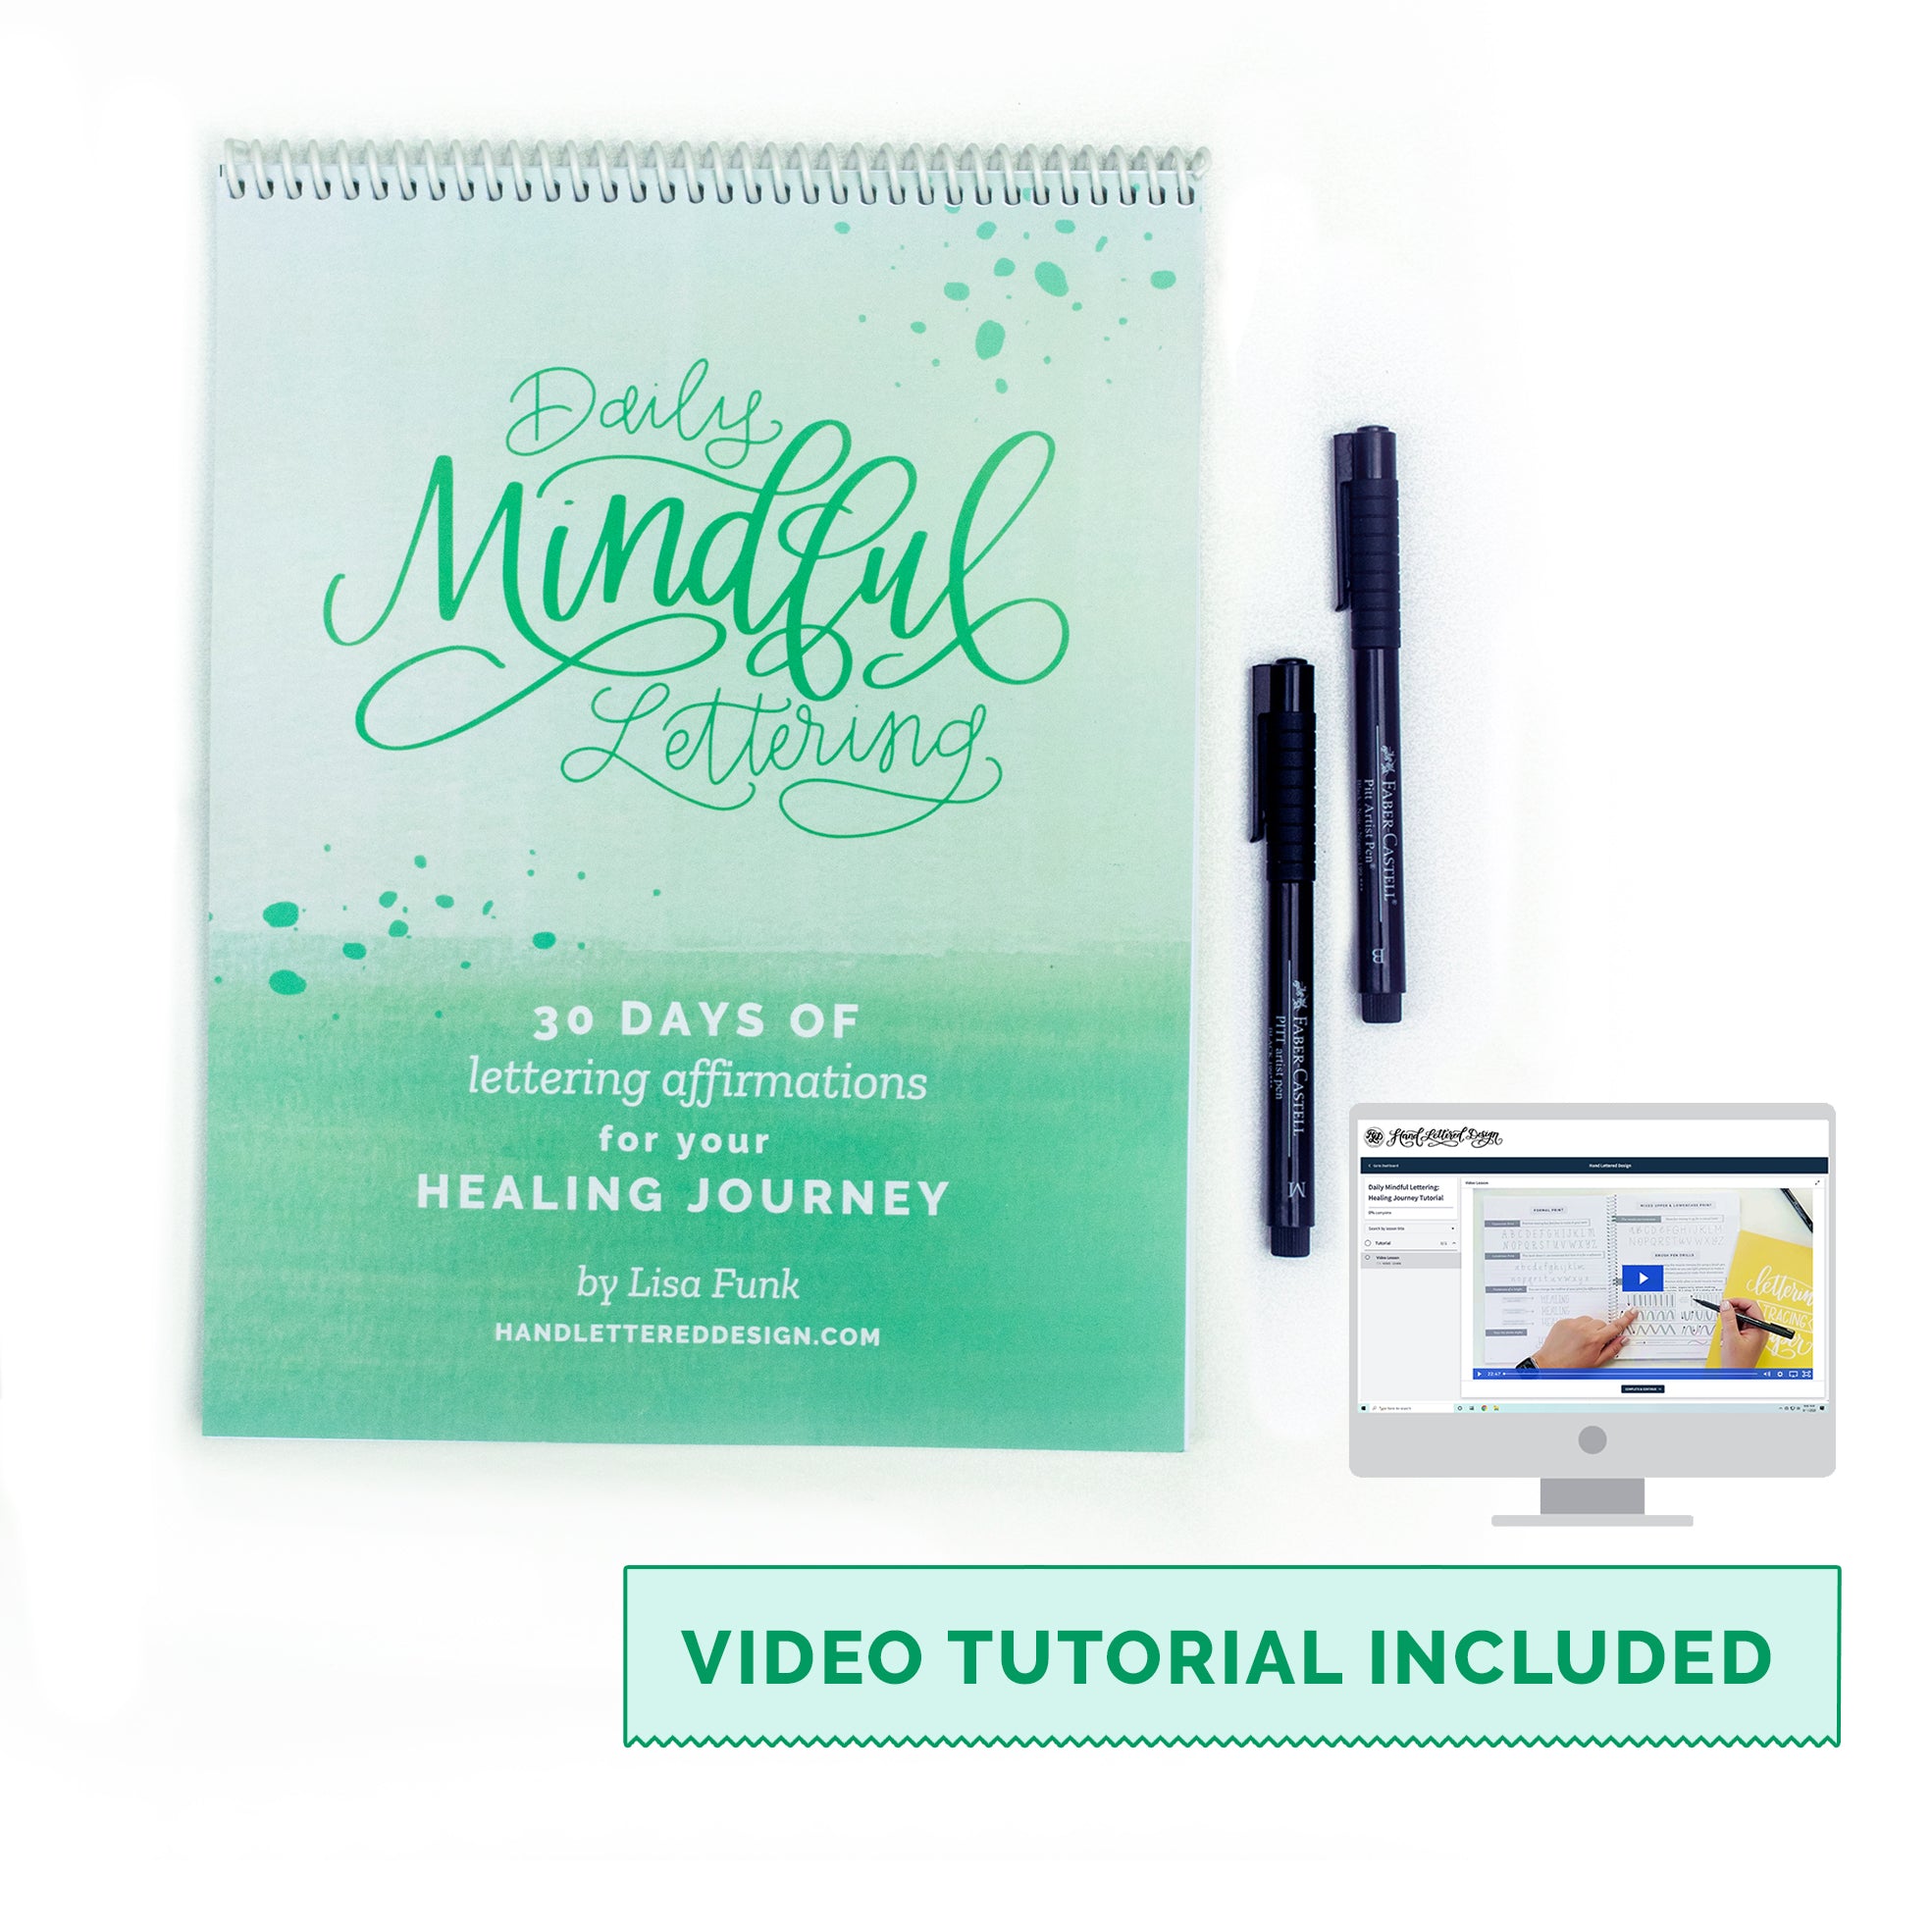 Daily mindful lettering book: Hand lettering for stress relief and  relaxation, H